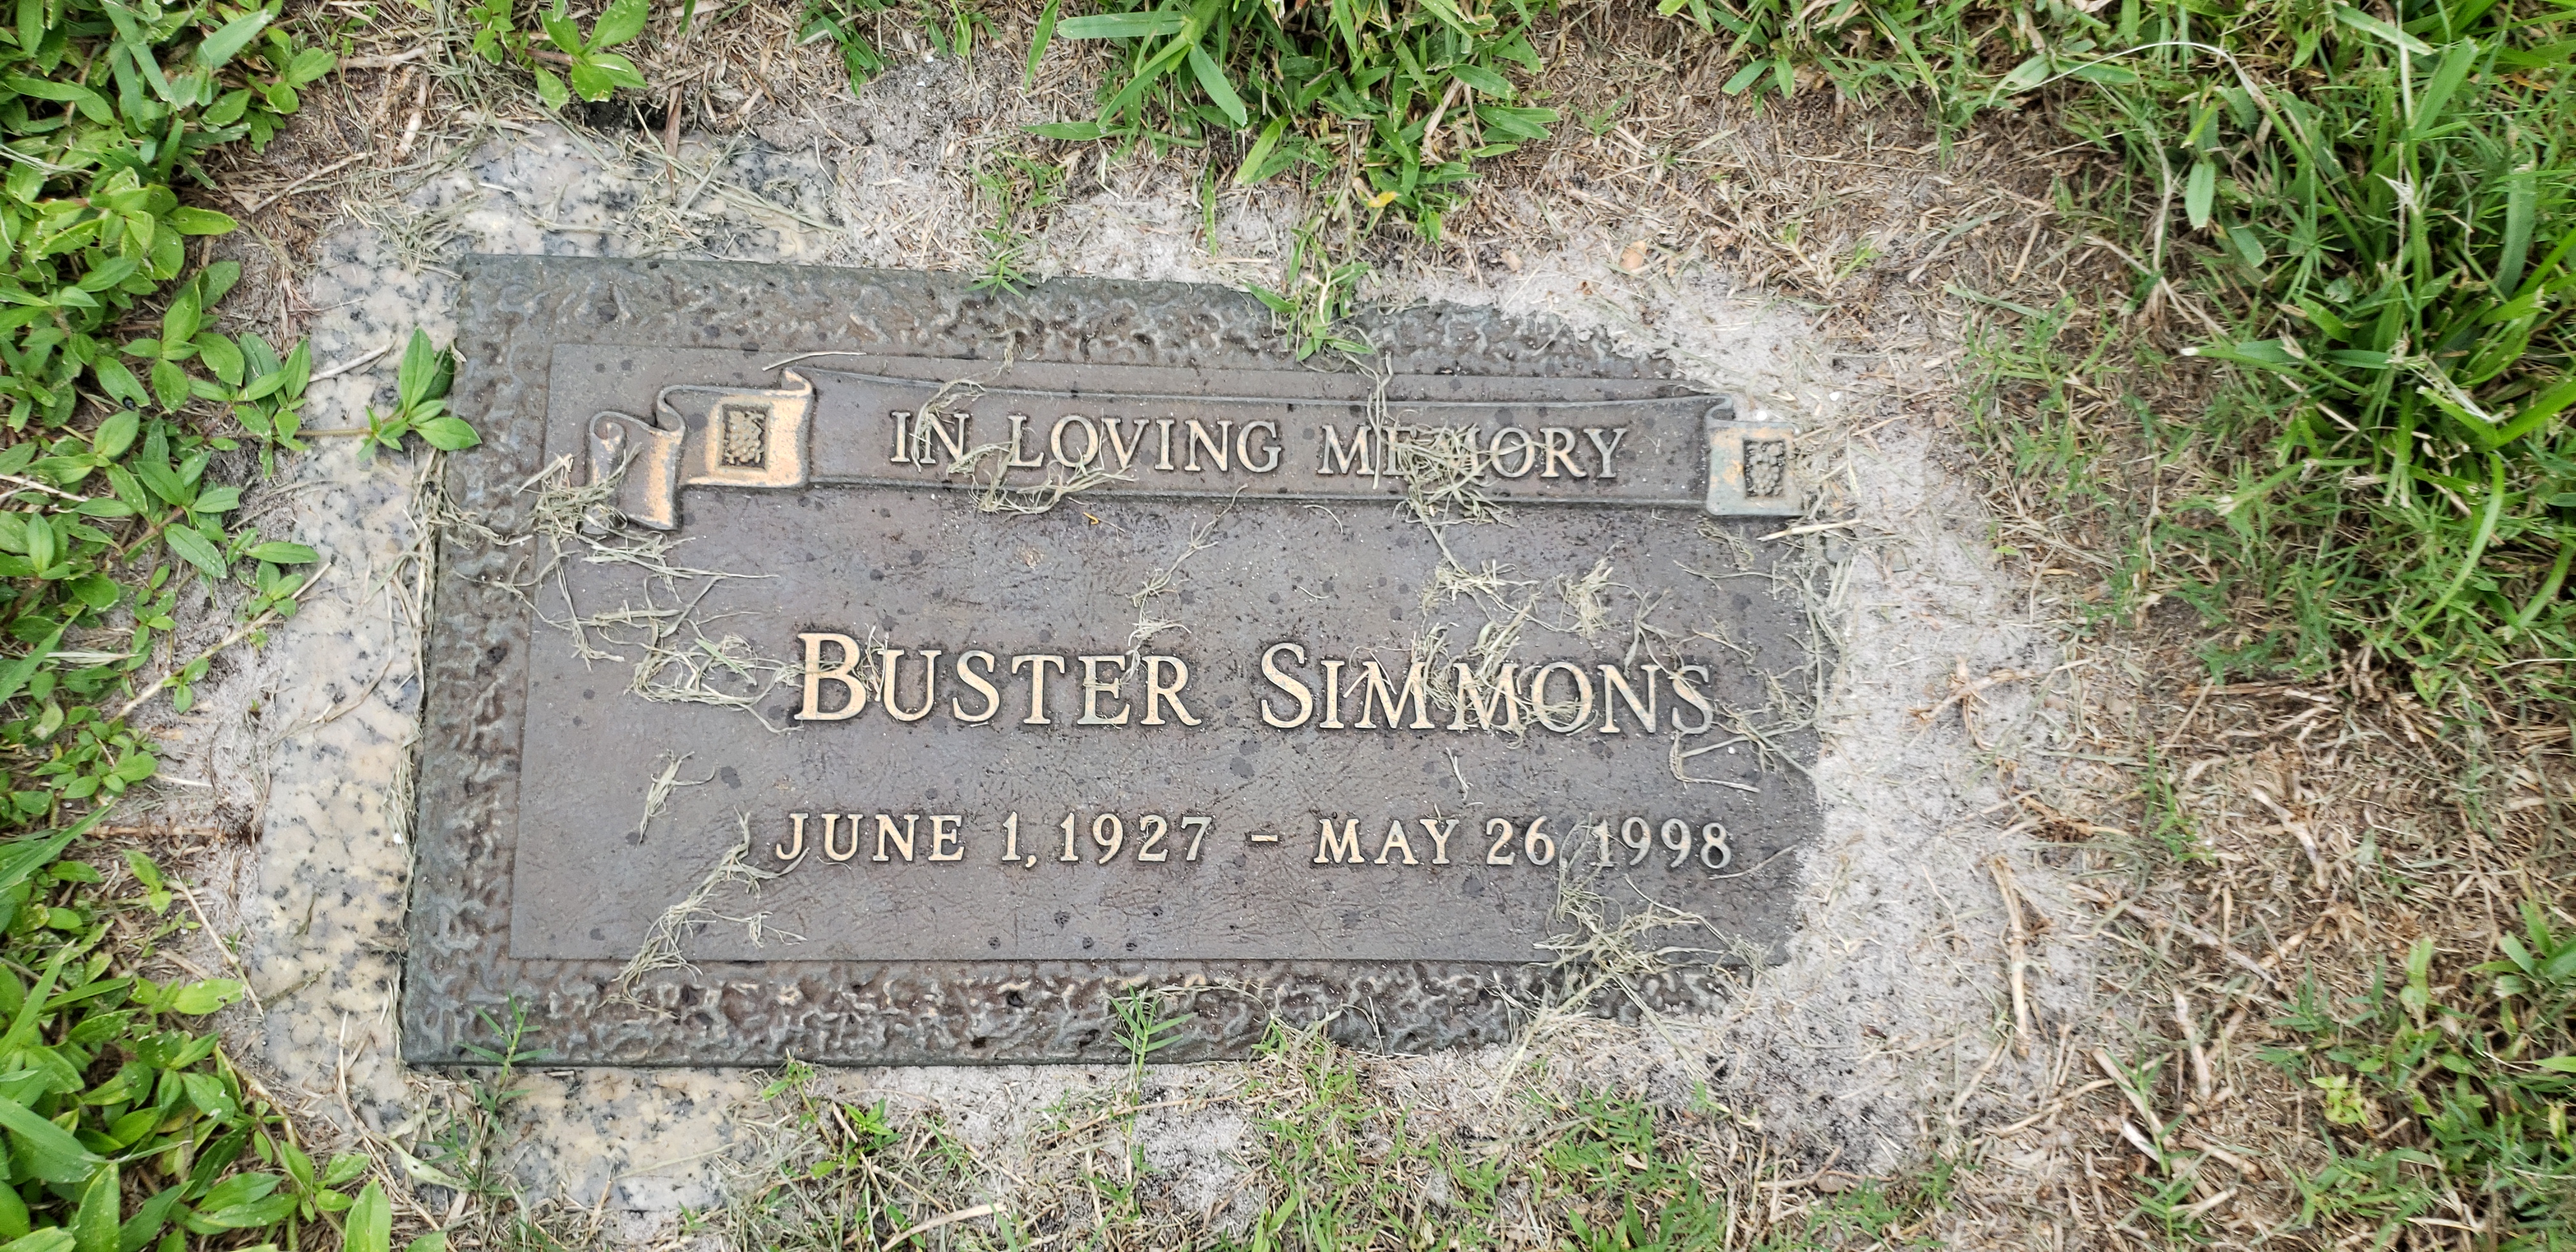 Buster Simmons